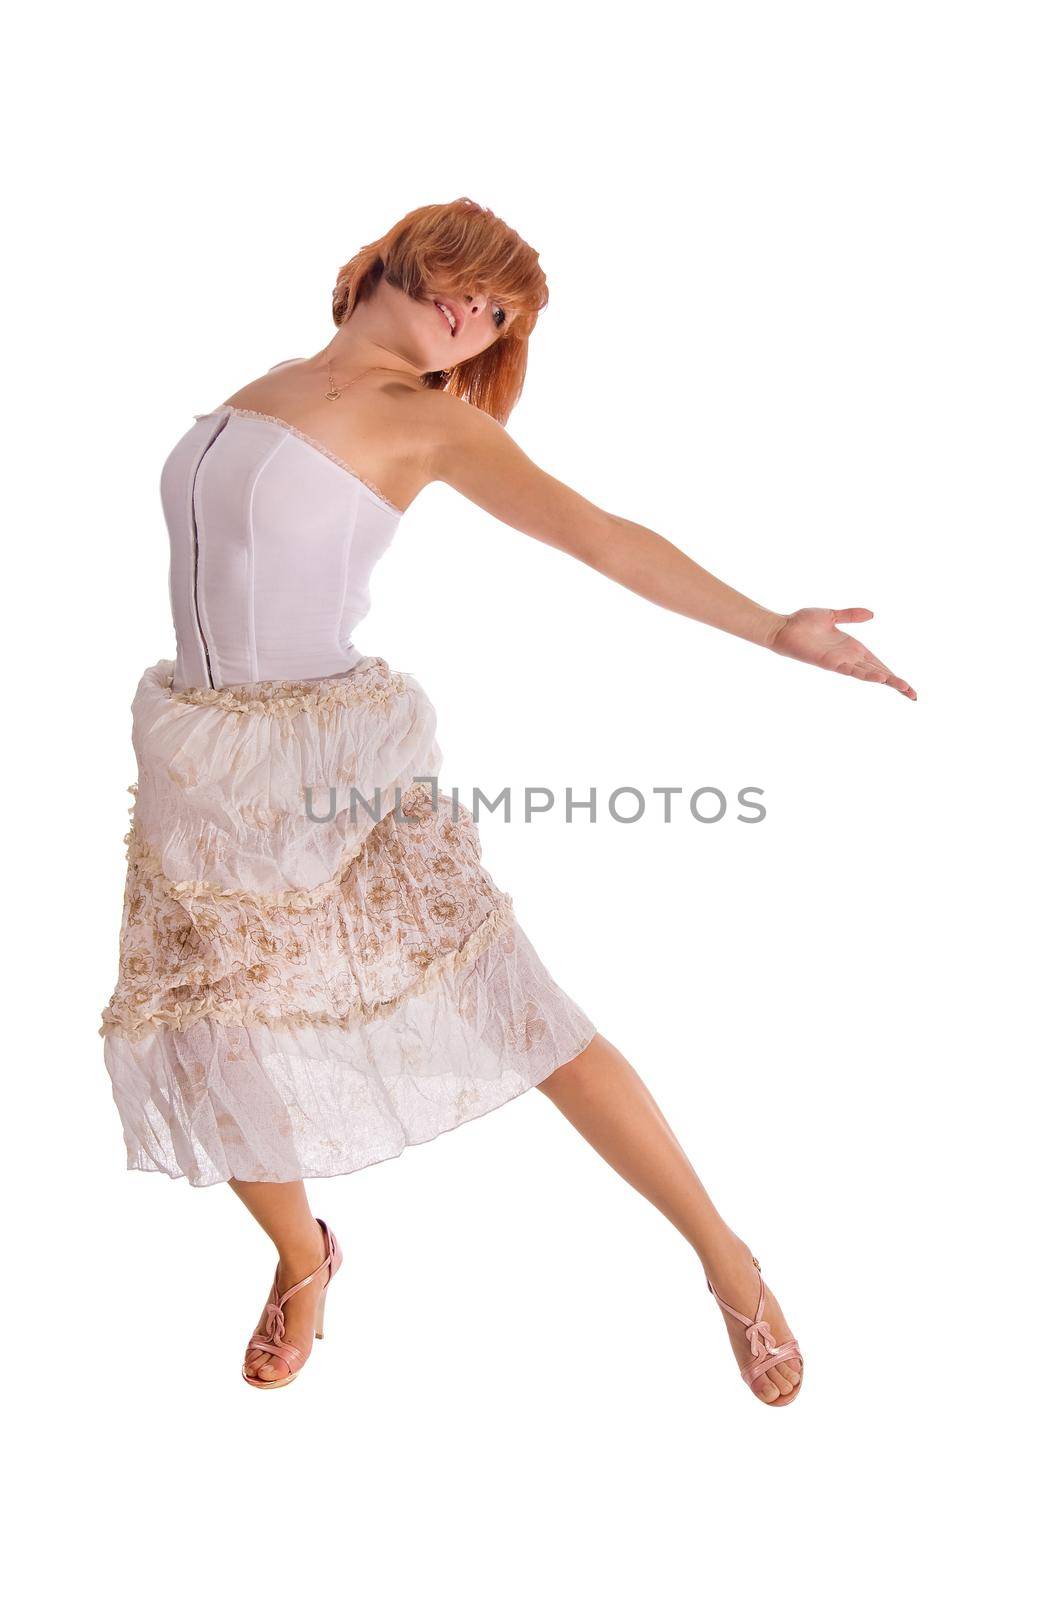 Red haired dancer isolated on white background